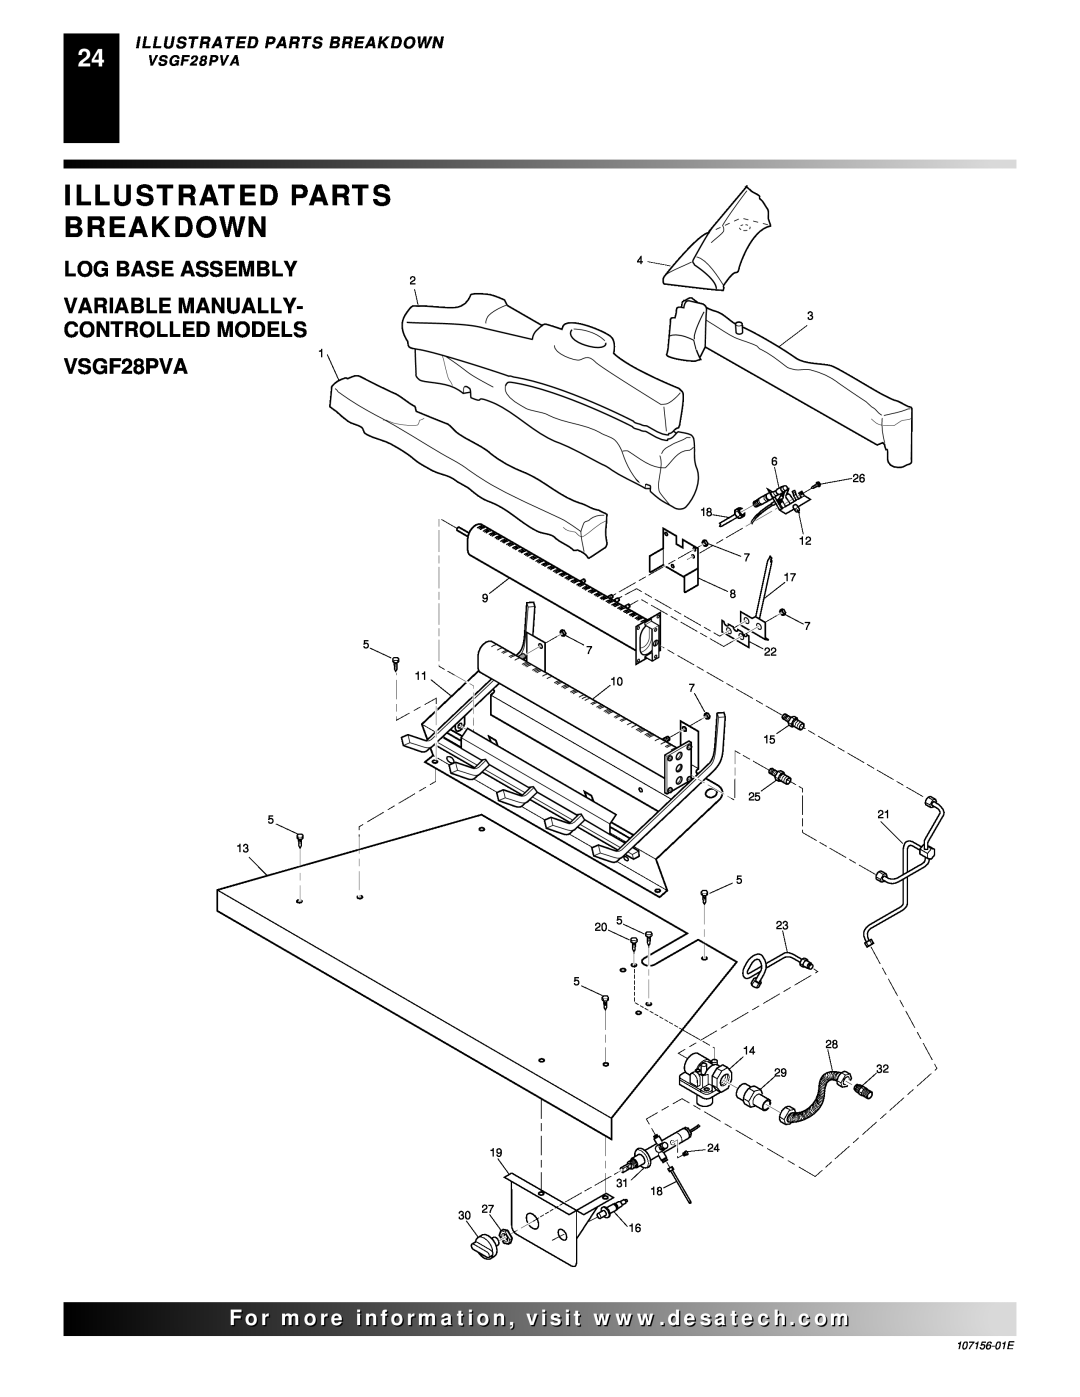 Vanguard Heating 107156-01E.pdf Illustrated Parts Breakdown, Log Base Assembly, Variable Manually Controlled Models 